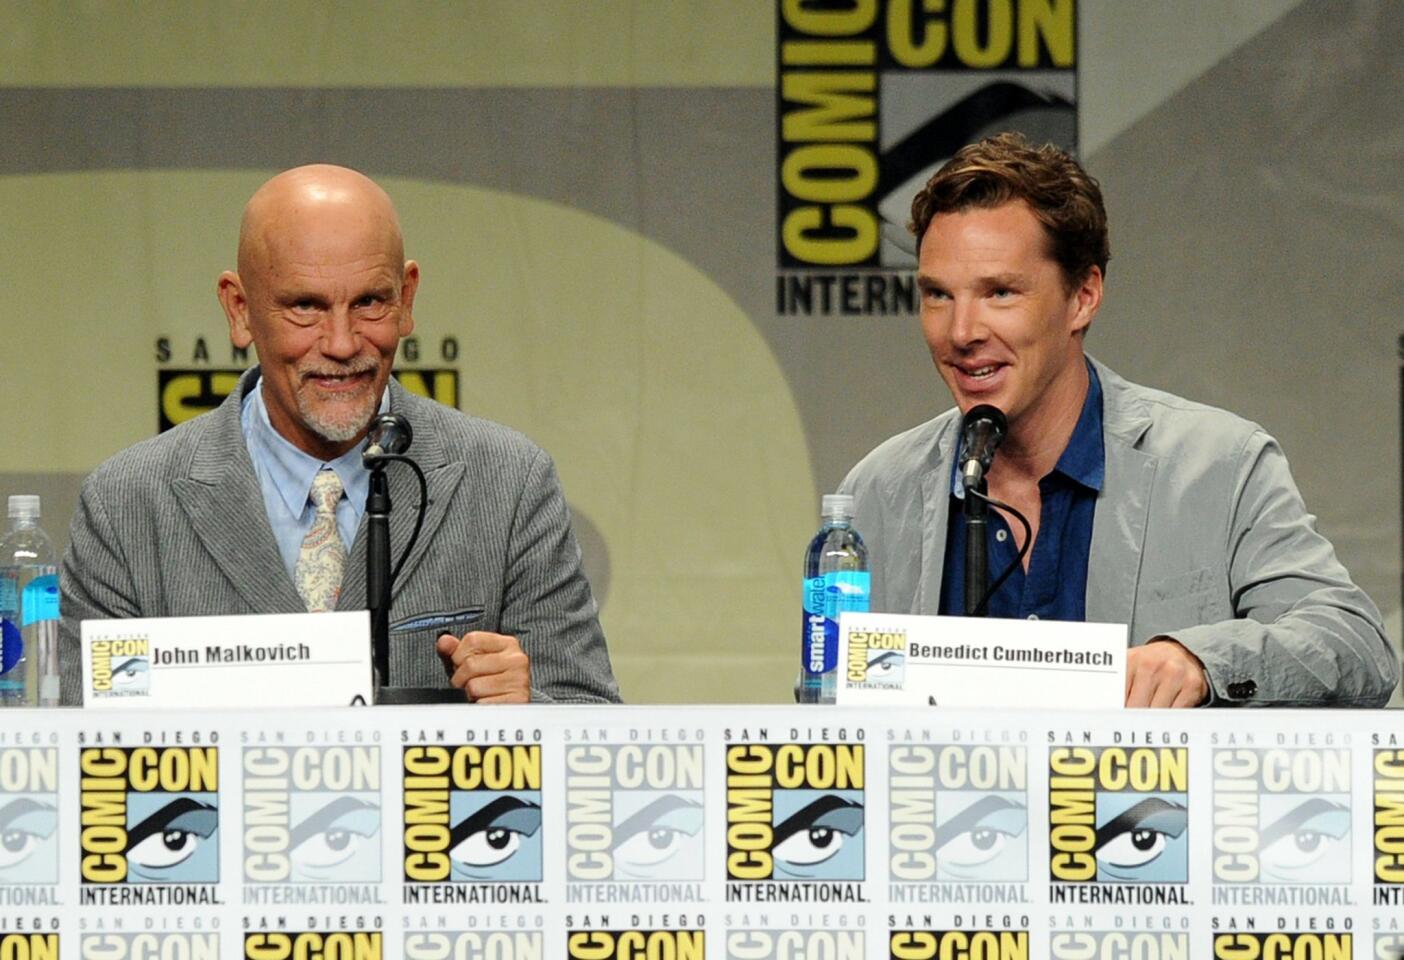 Actors John Malkovich (L) and Benedict Cumberbatch attend the DreamWorks Animation presentation.